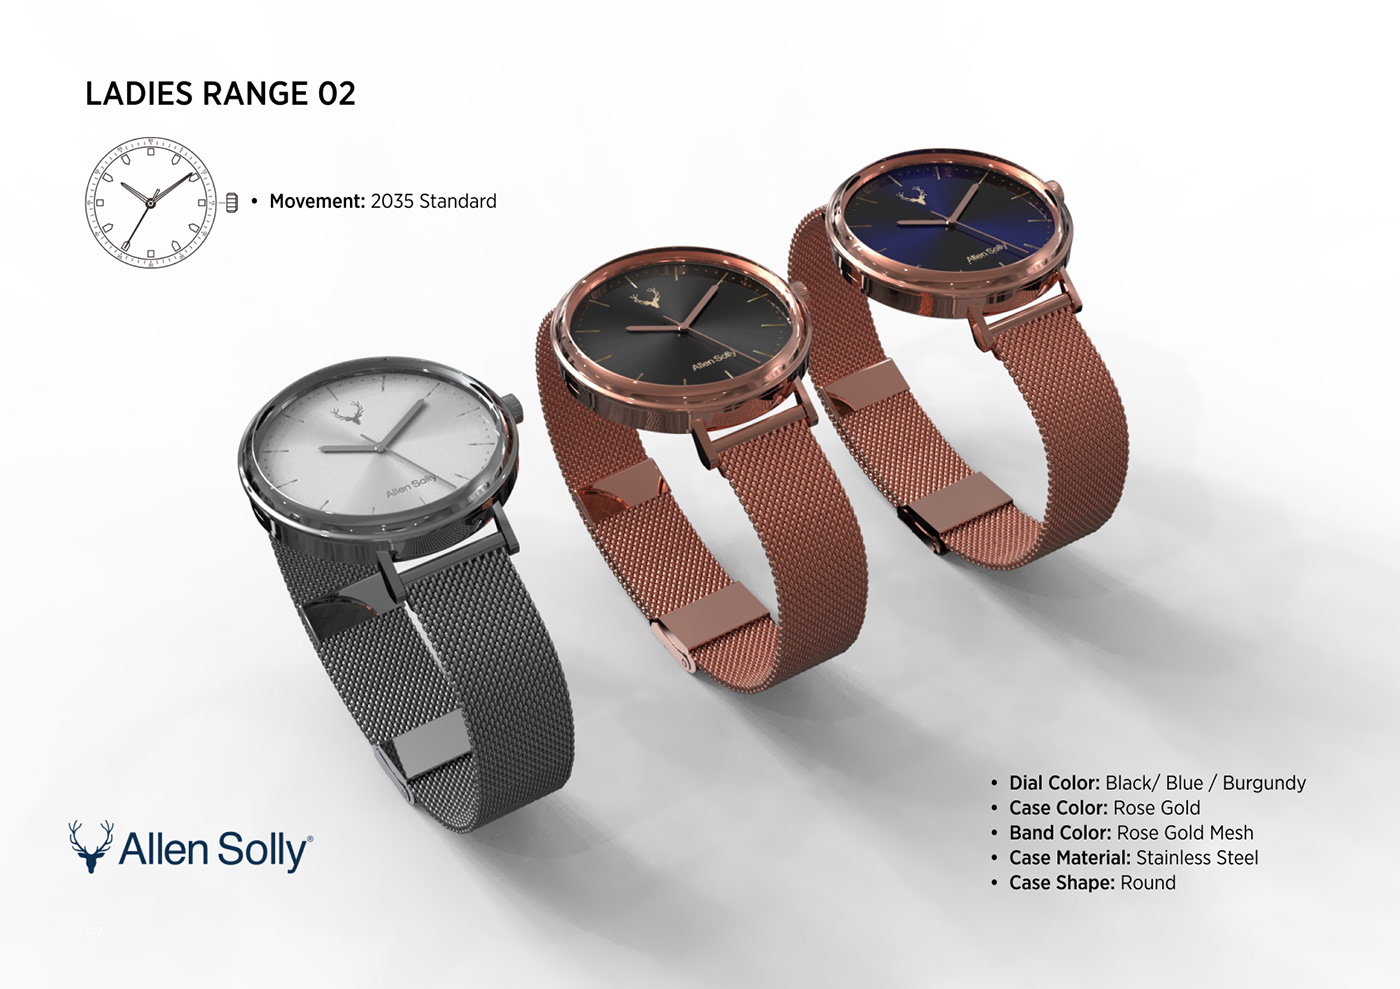 Allen Solly Watches Timex product concept visualization 3D 3d modeling and rendering